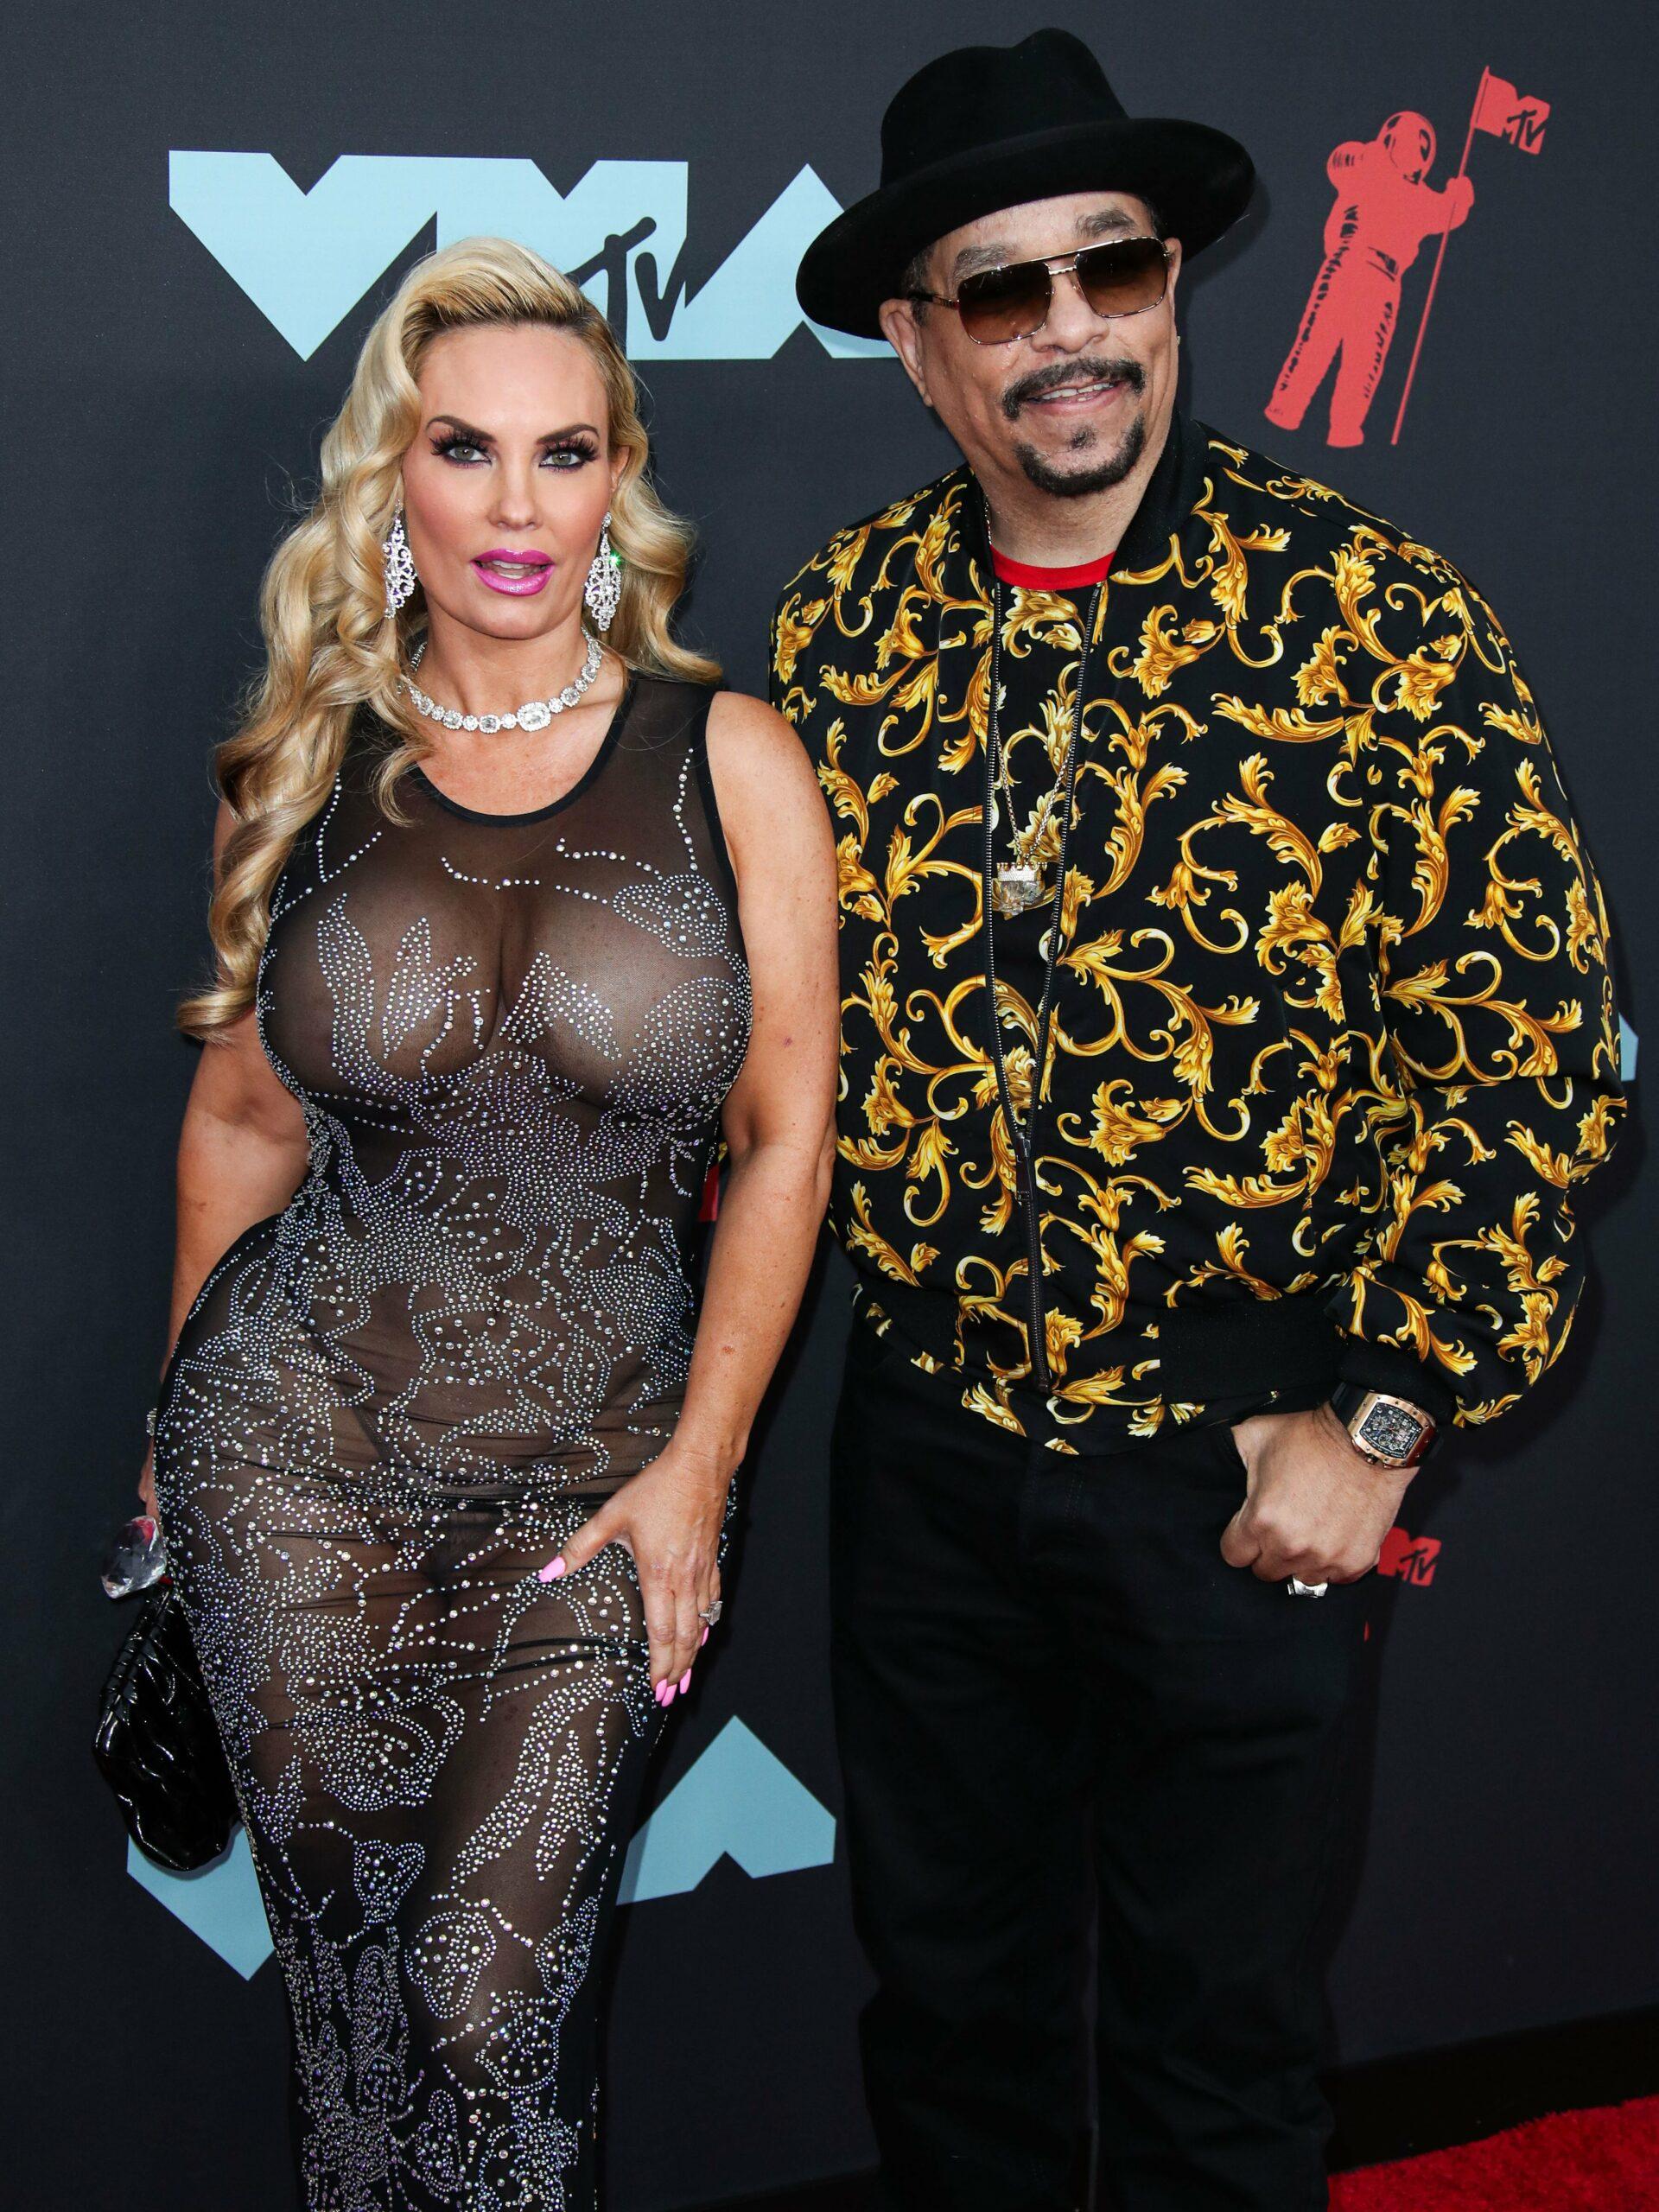 Ice-T and Coco Austin at the2019 MTV Video Music Awards - Arrivals